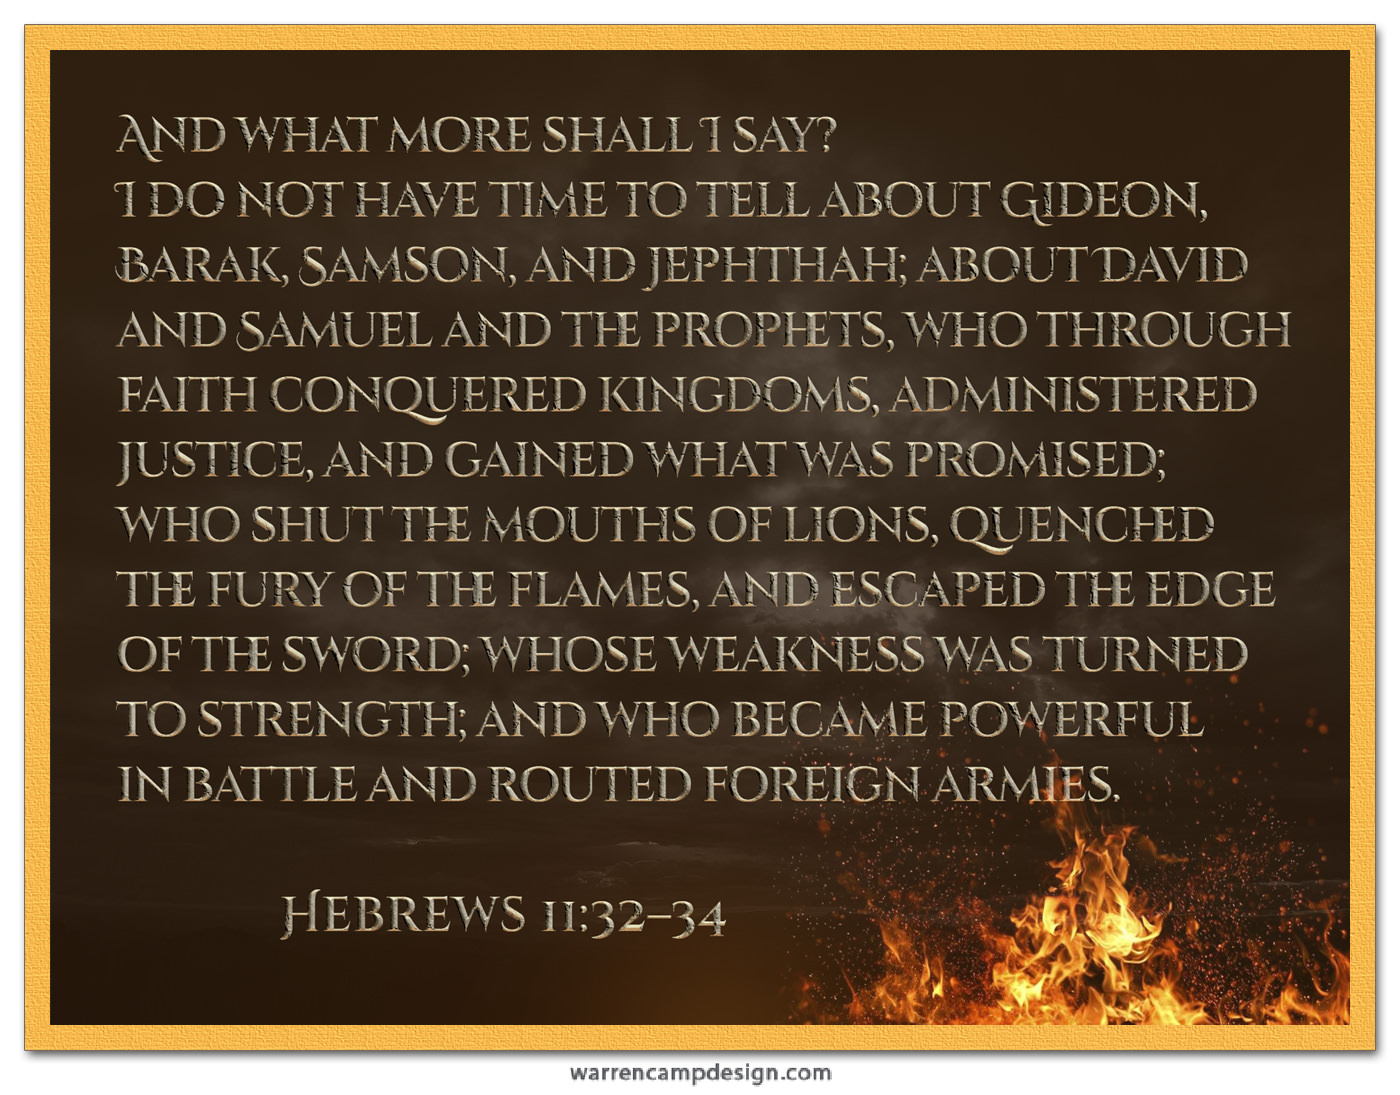 Scripture picture of Hebrews 11:32-34, emphasizing several of the Old Testament's faith-based heroes who suffered